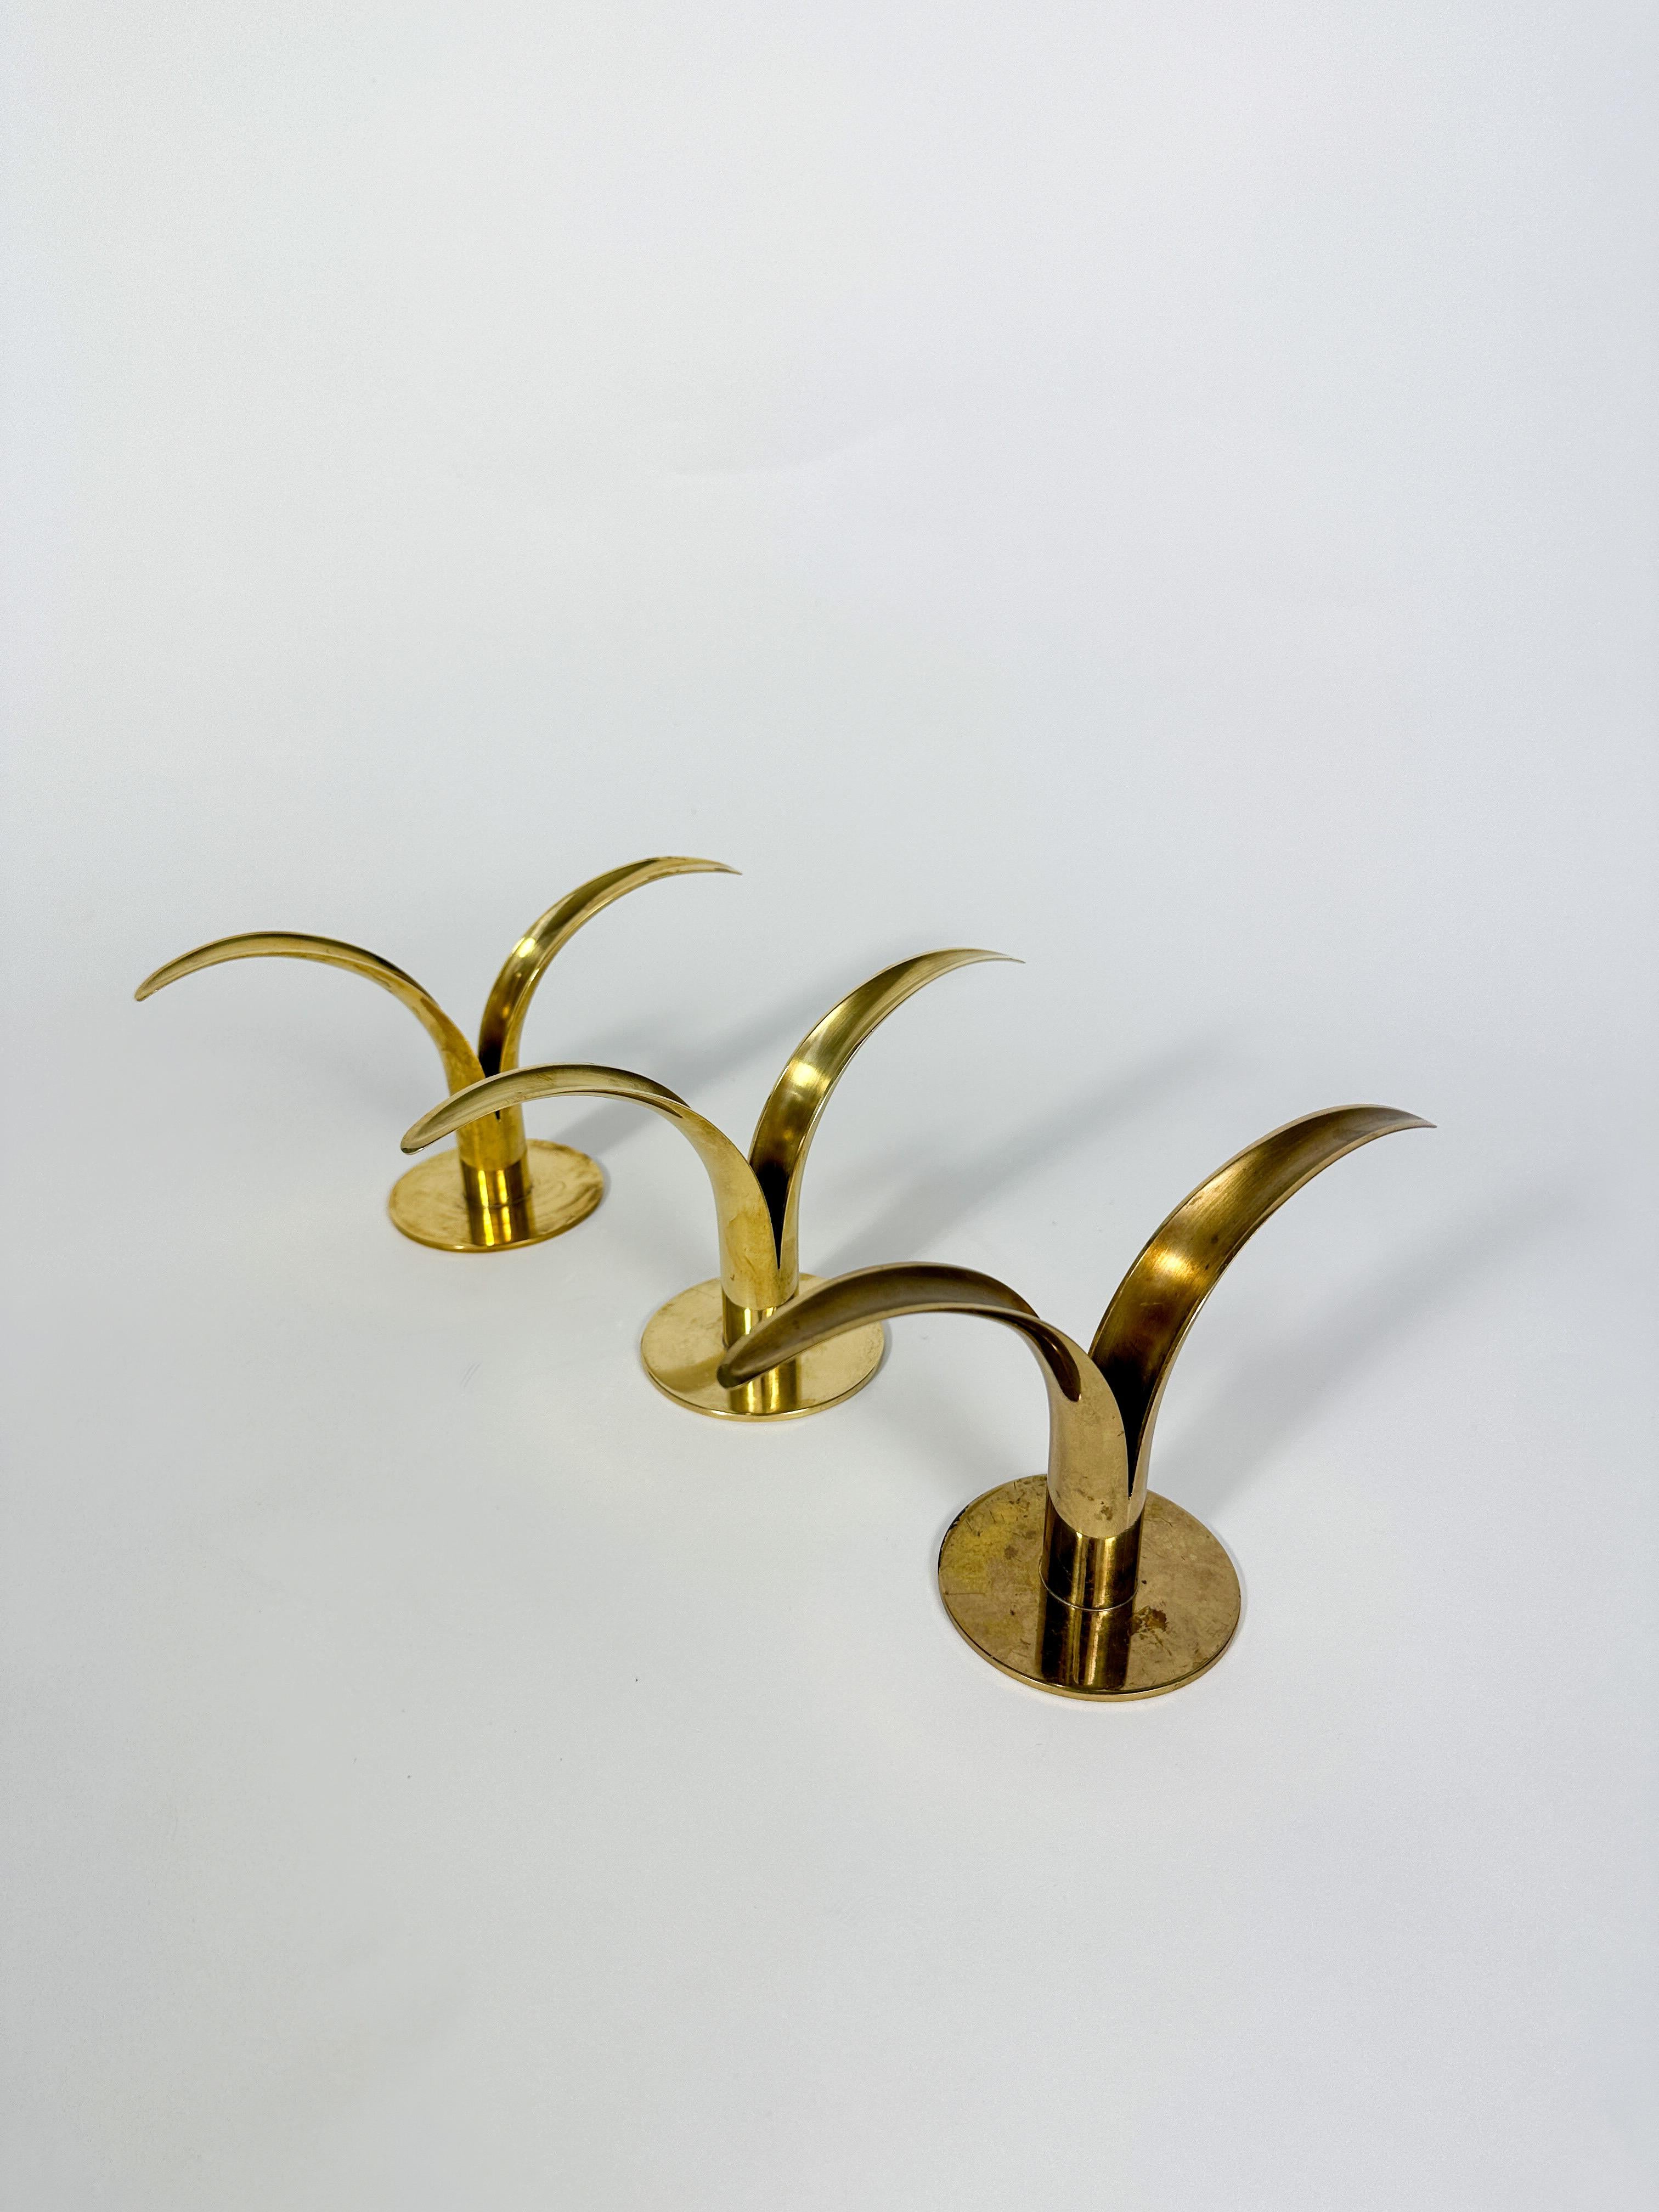 Hand-Crafted Set of Three Ivar Alenius Björk Lily Candle Holders Ystad Metall Sweden Brass 